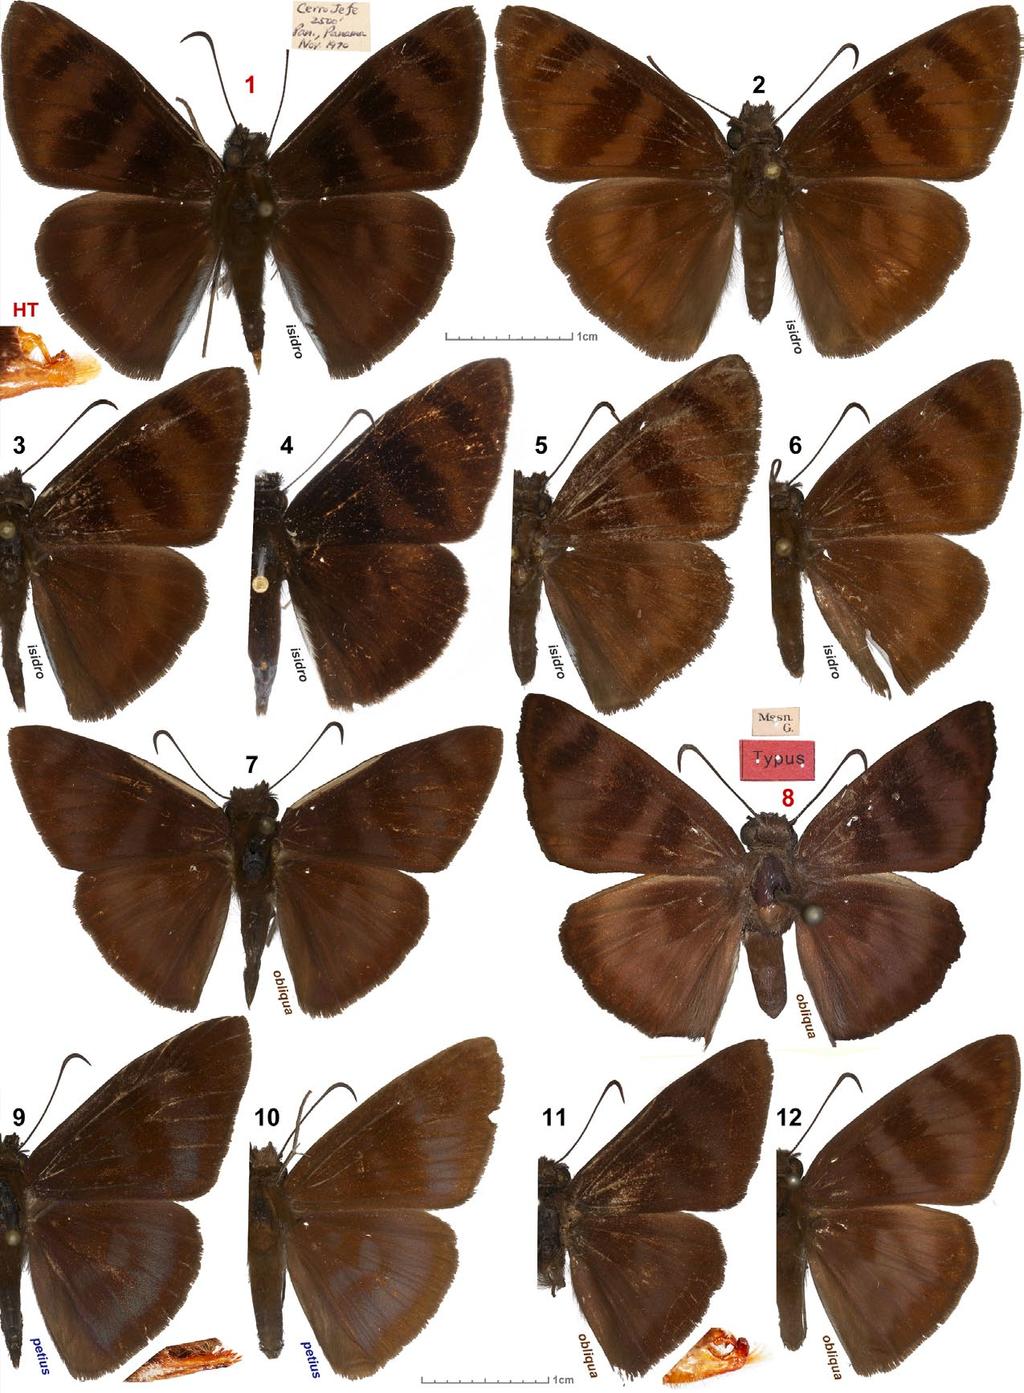 2 TROP. LEPID. RES., 22(1): 1-7, 2012 GRISHIN: New species of Anastrus Figs. 1-24. Anastrus specimens. 1-12. dorsal view and 13-24. ventral view of the same specimens. 1, 13. A. isidro n. sp. holotype - PANAMA: Panamá Province, Cerro Jefe, 760m, November 1970 [USNM], genitalia in situ on the left; 2, 14.